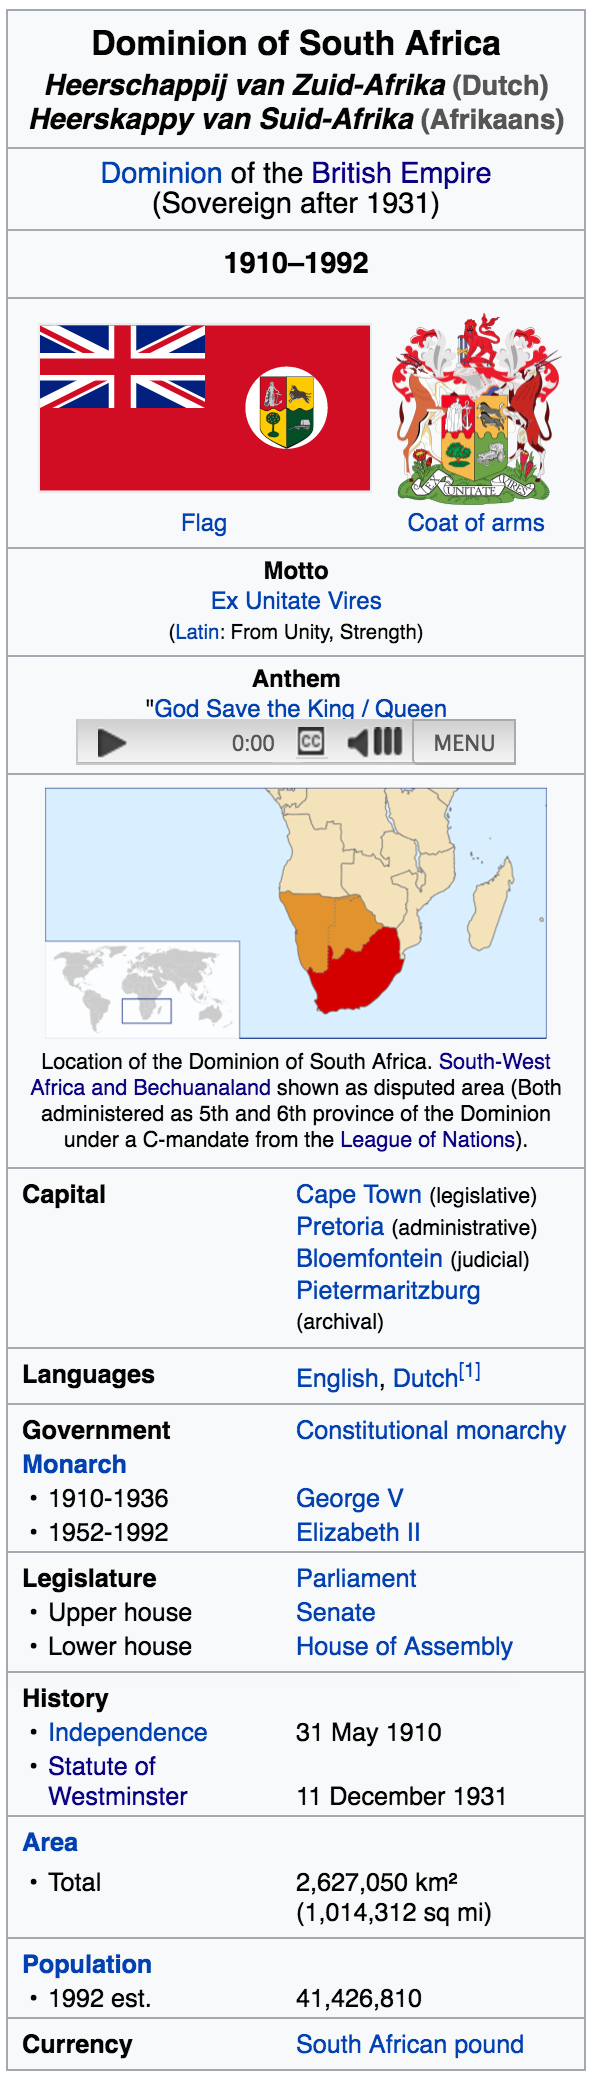 dominion of south africa.png